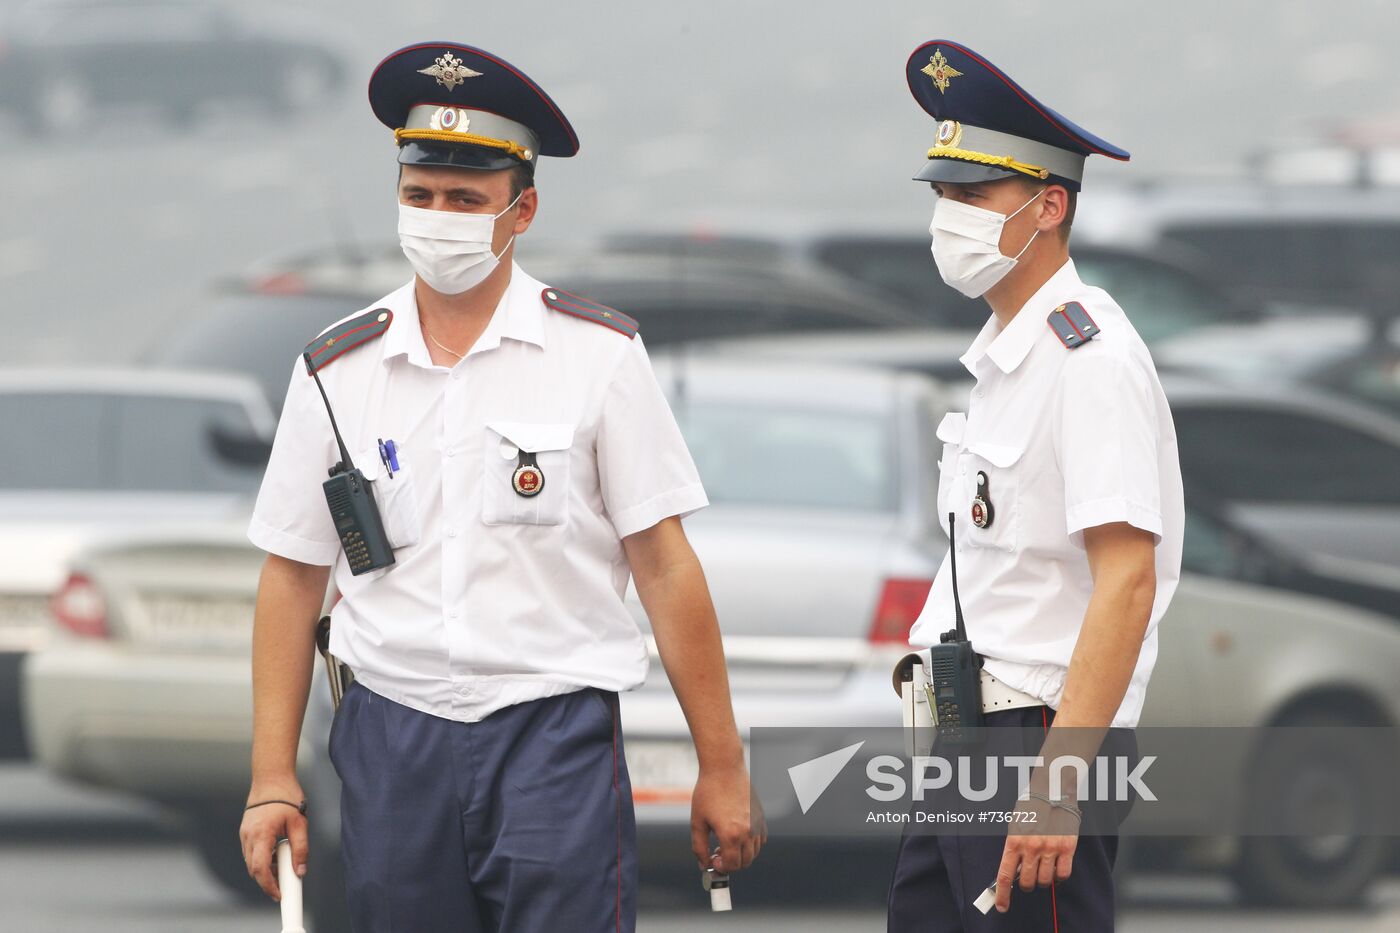 Traffic police officers in gas masks